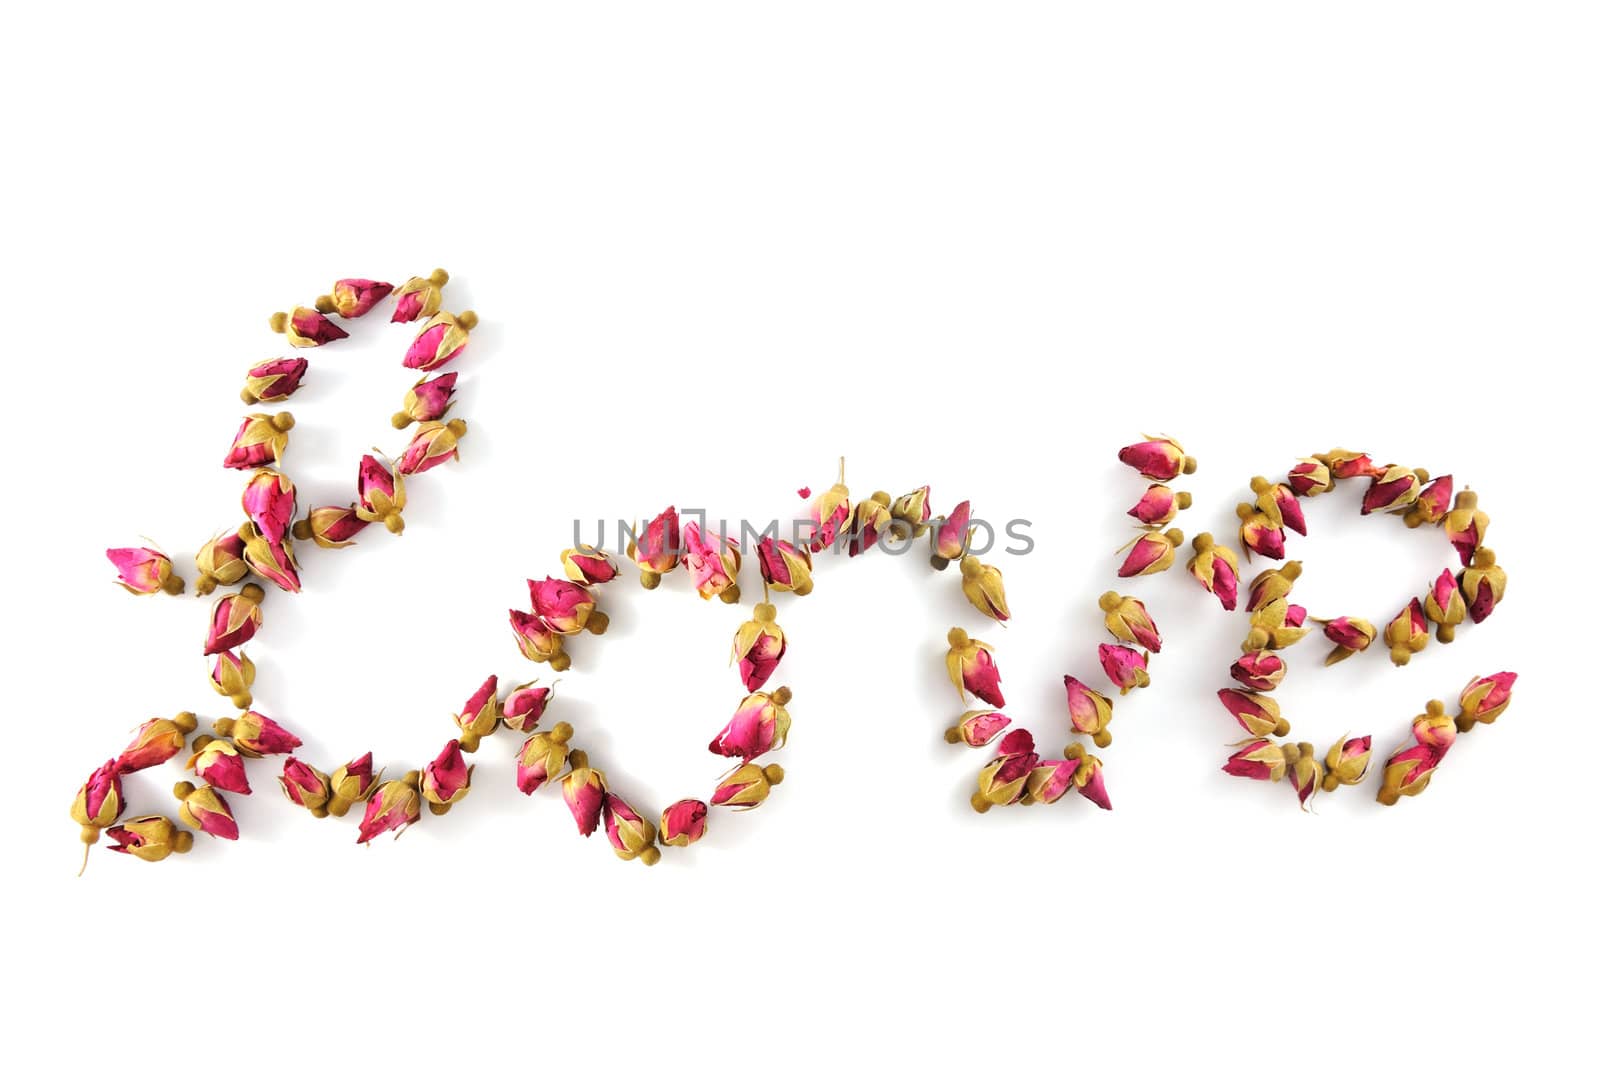 Love word made of dried flowers on white background